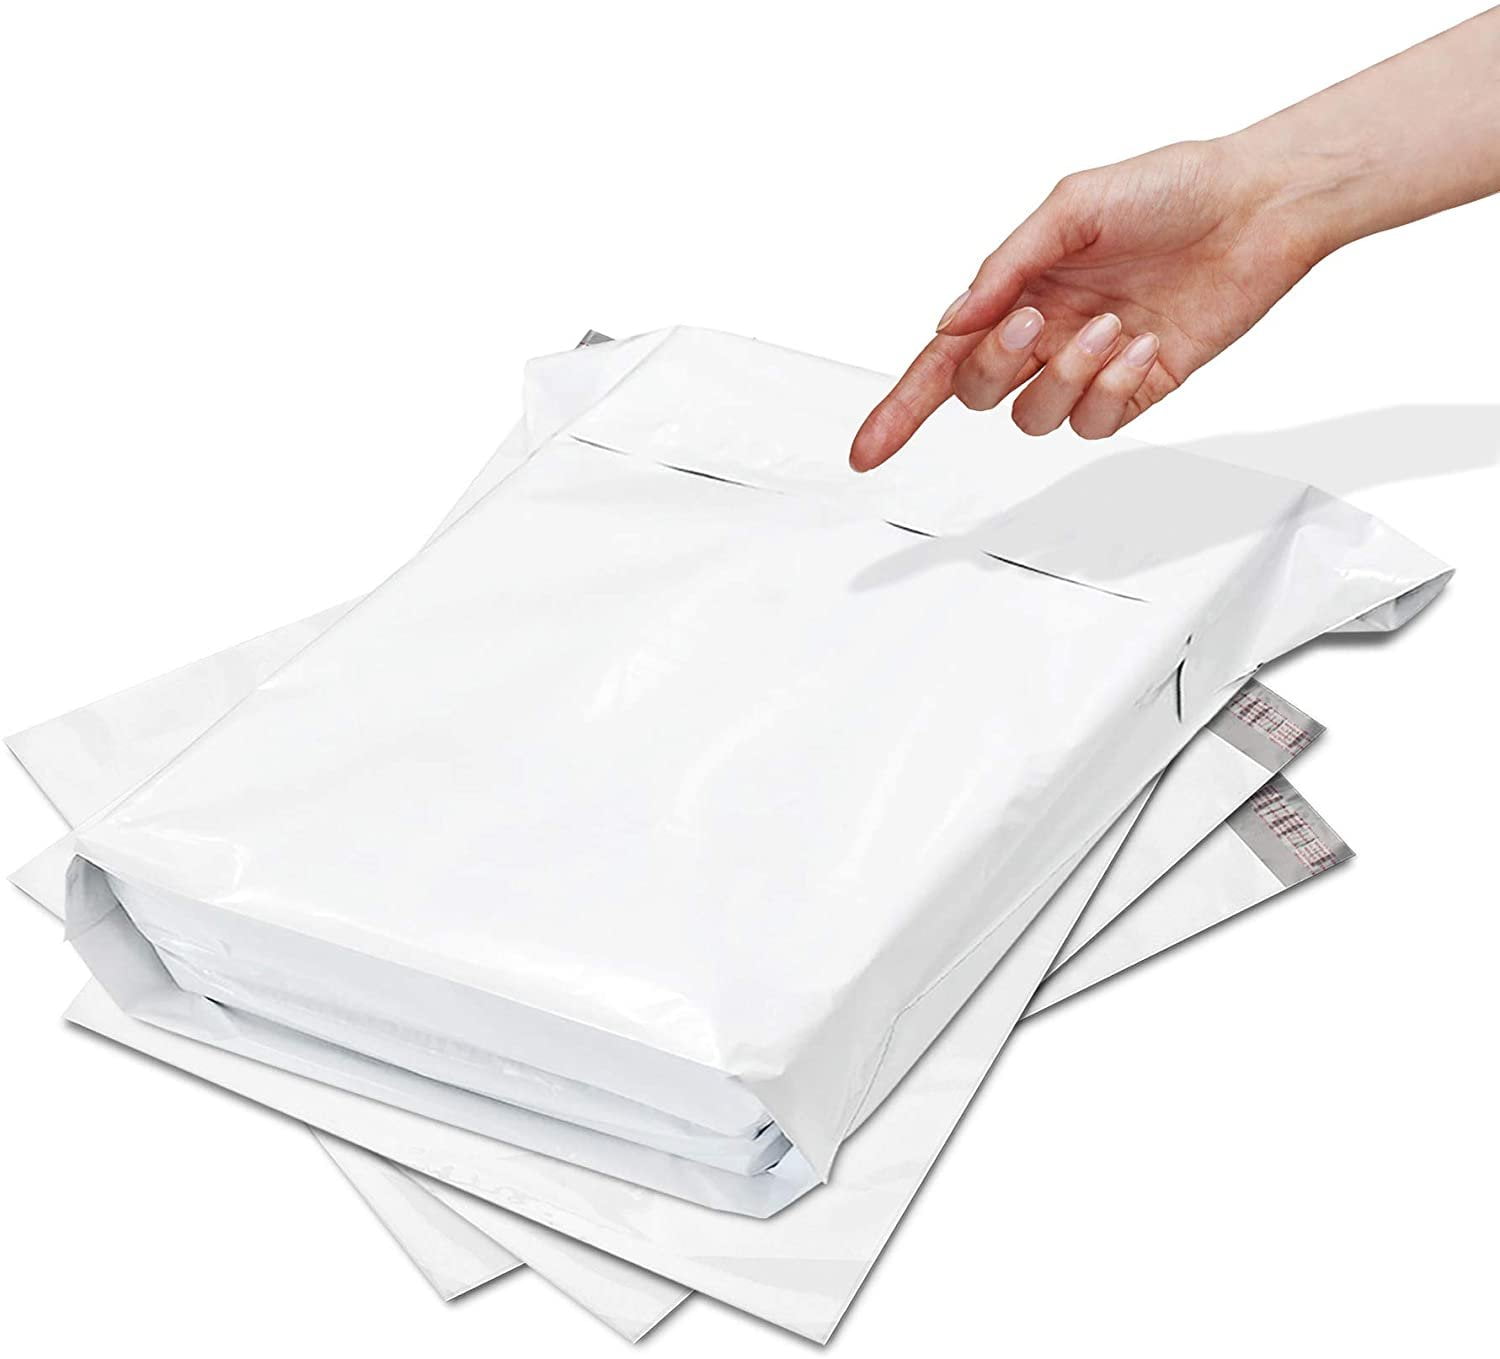 25 6x6 Square White Poly Mailers Shipping Envelopes Self Sealing Bags 2.35 MIL 